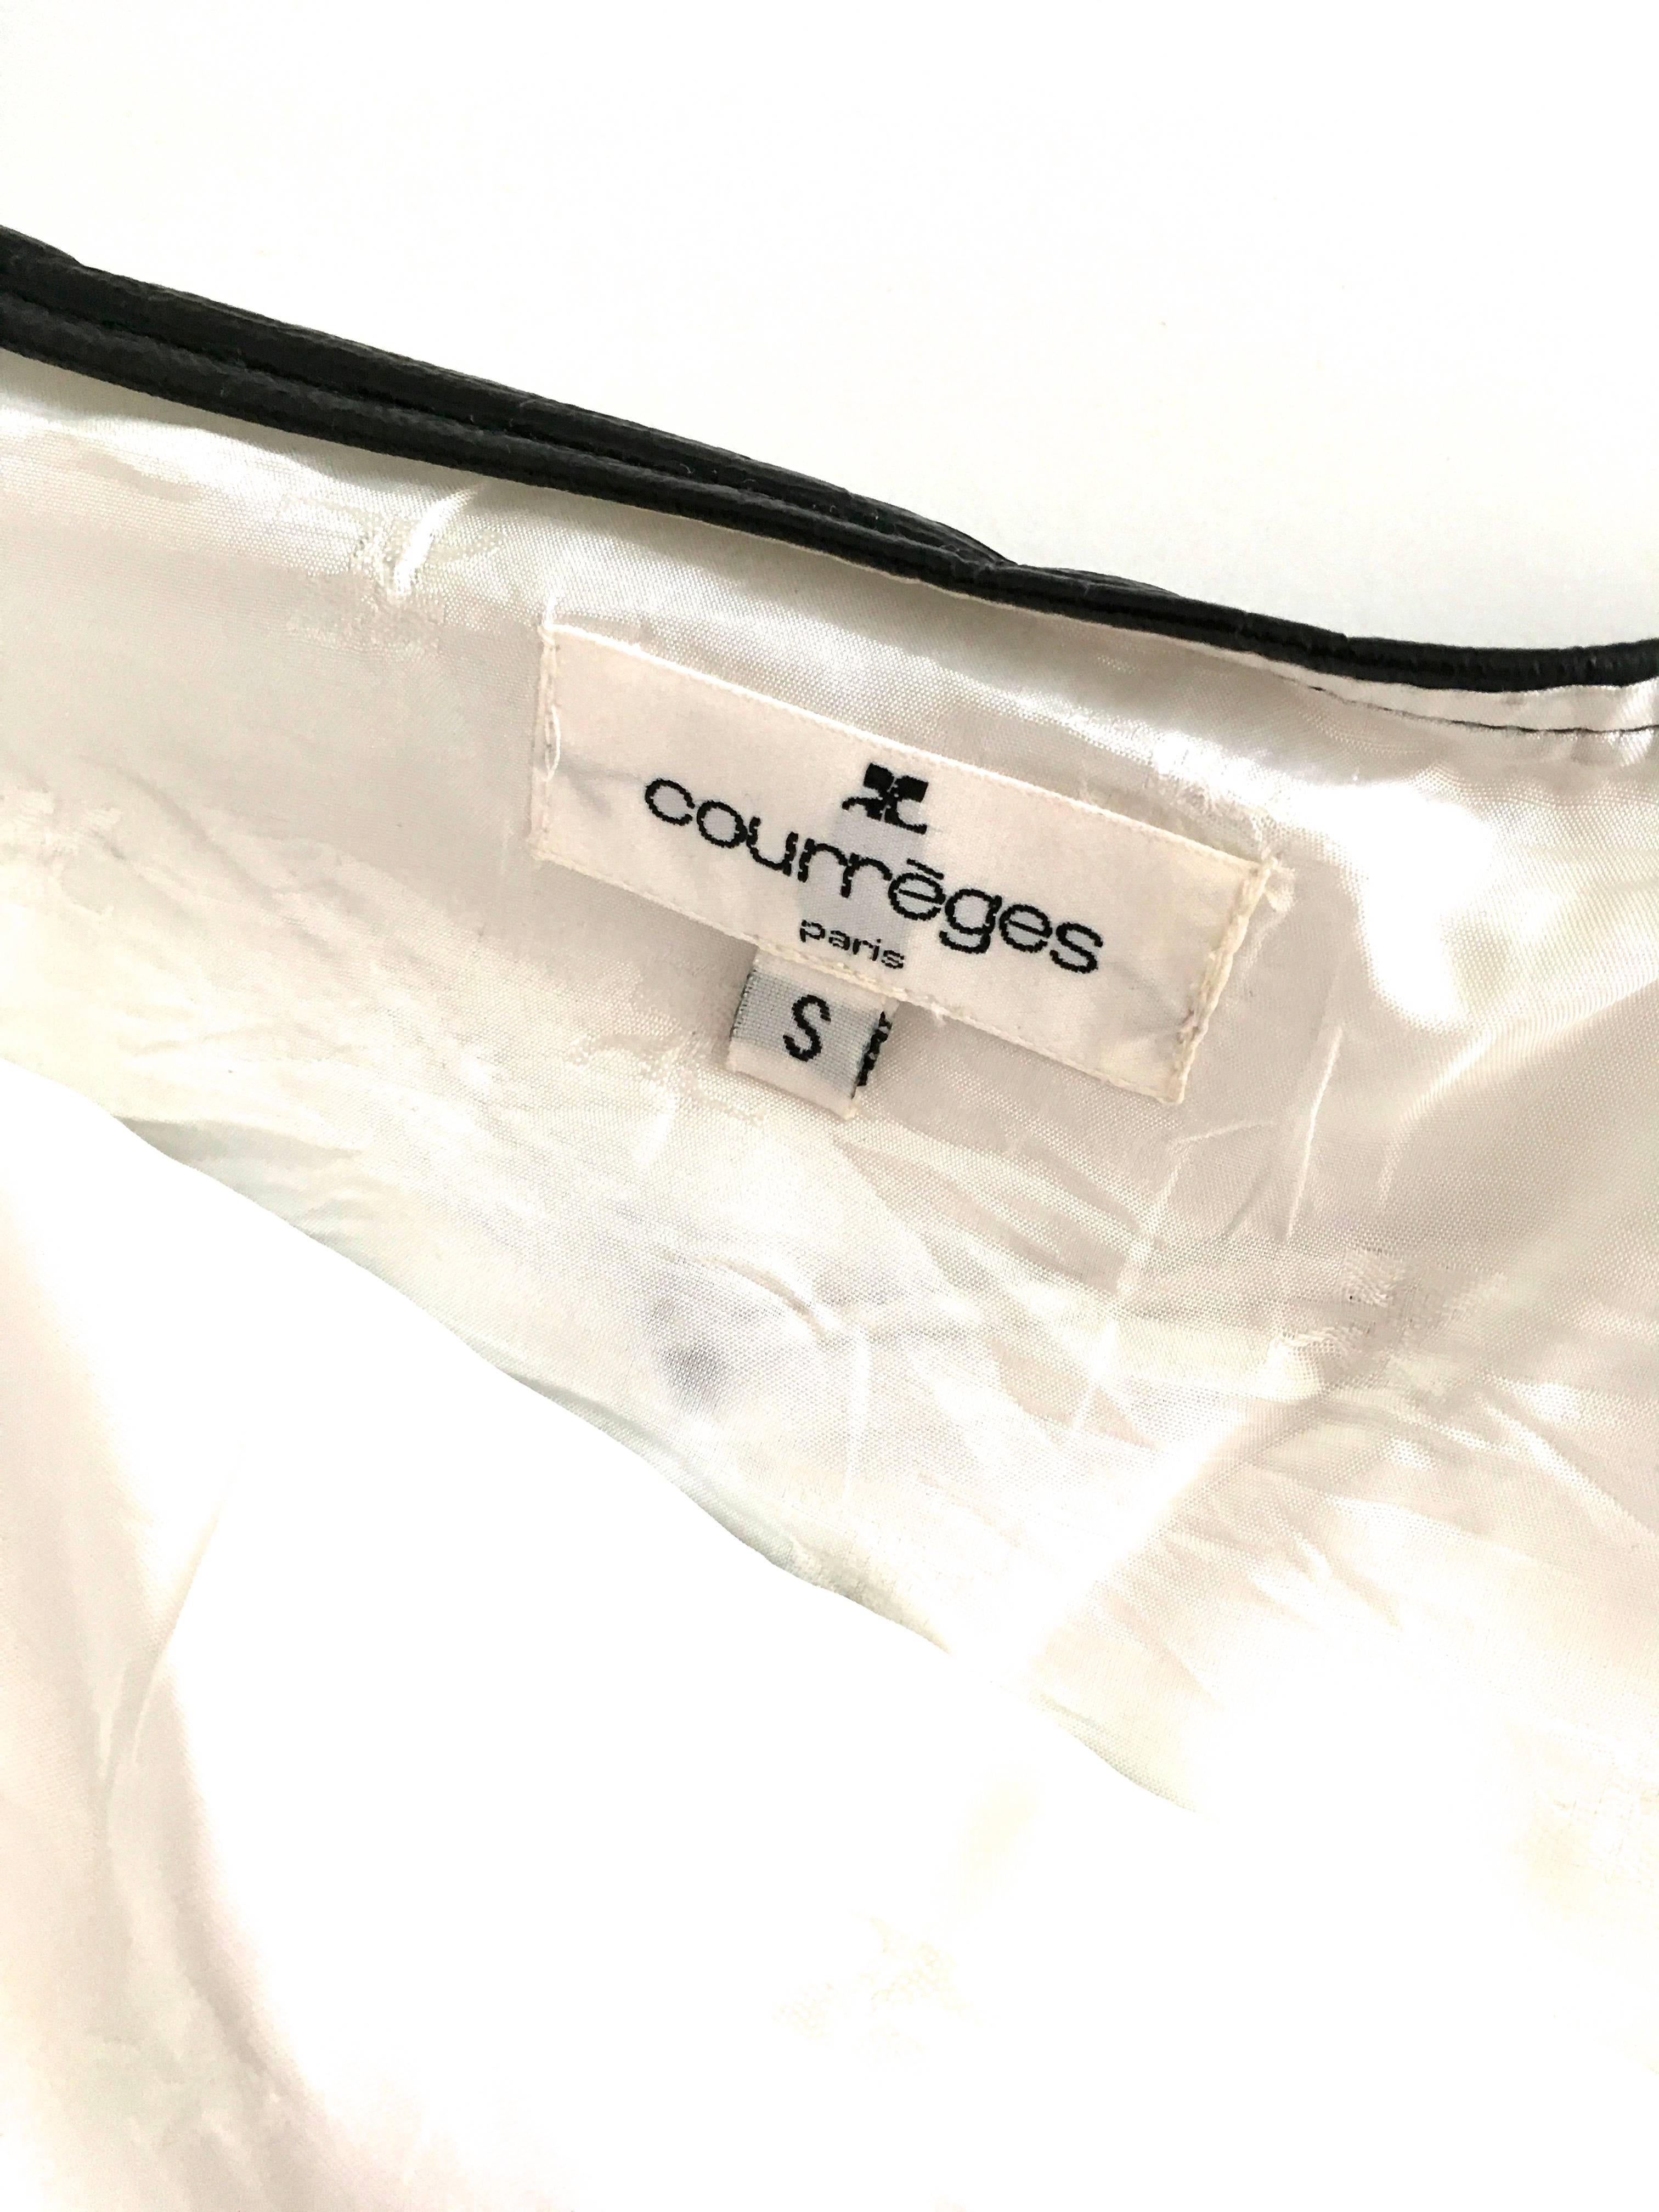 Courreges Mini Skirt - 1980's - Small  In Excellent Condition For Sale In Boca Raton, FL